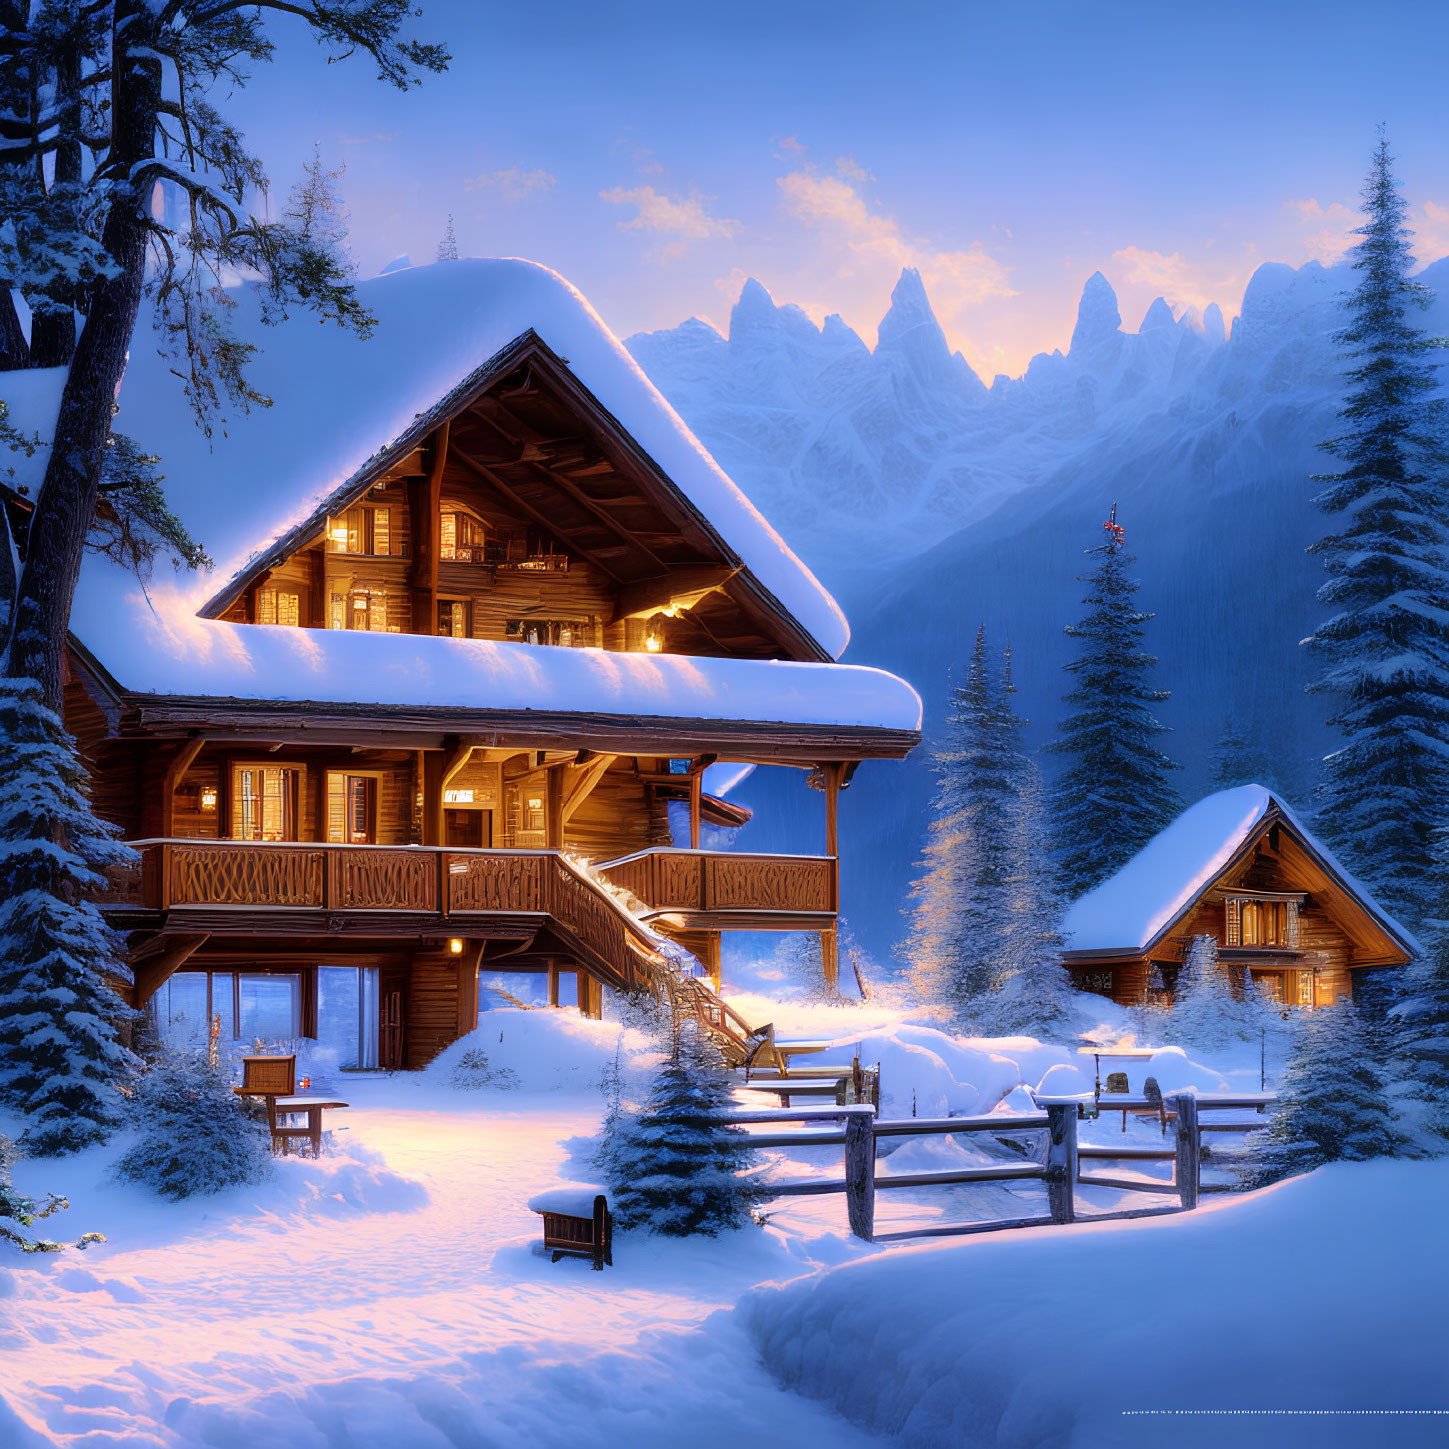 Snowy cabin nestled in winter landscape with pine trees and mountains at dusk